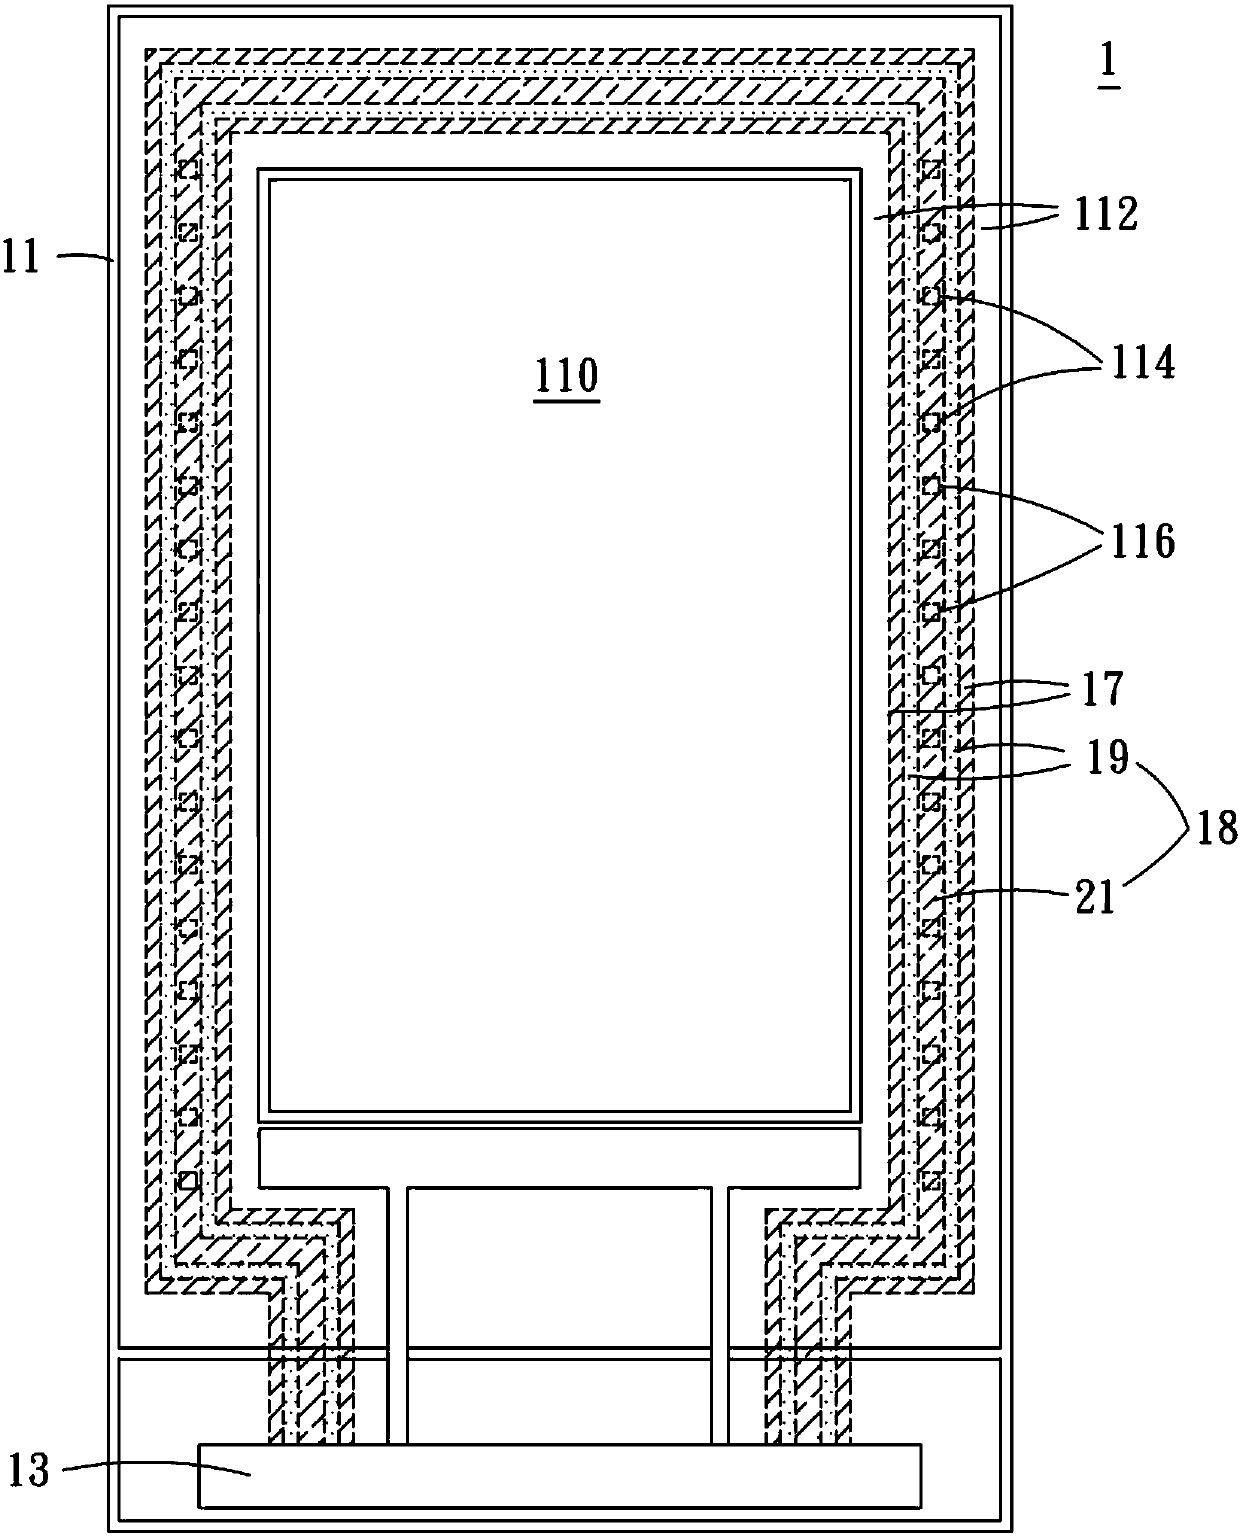 Display screen structure